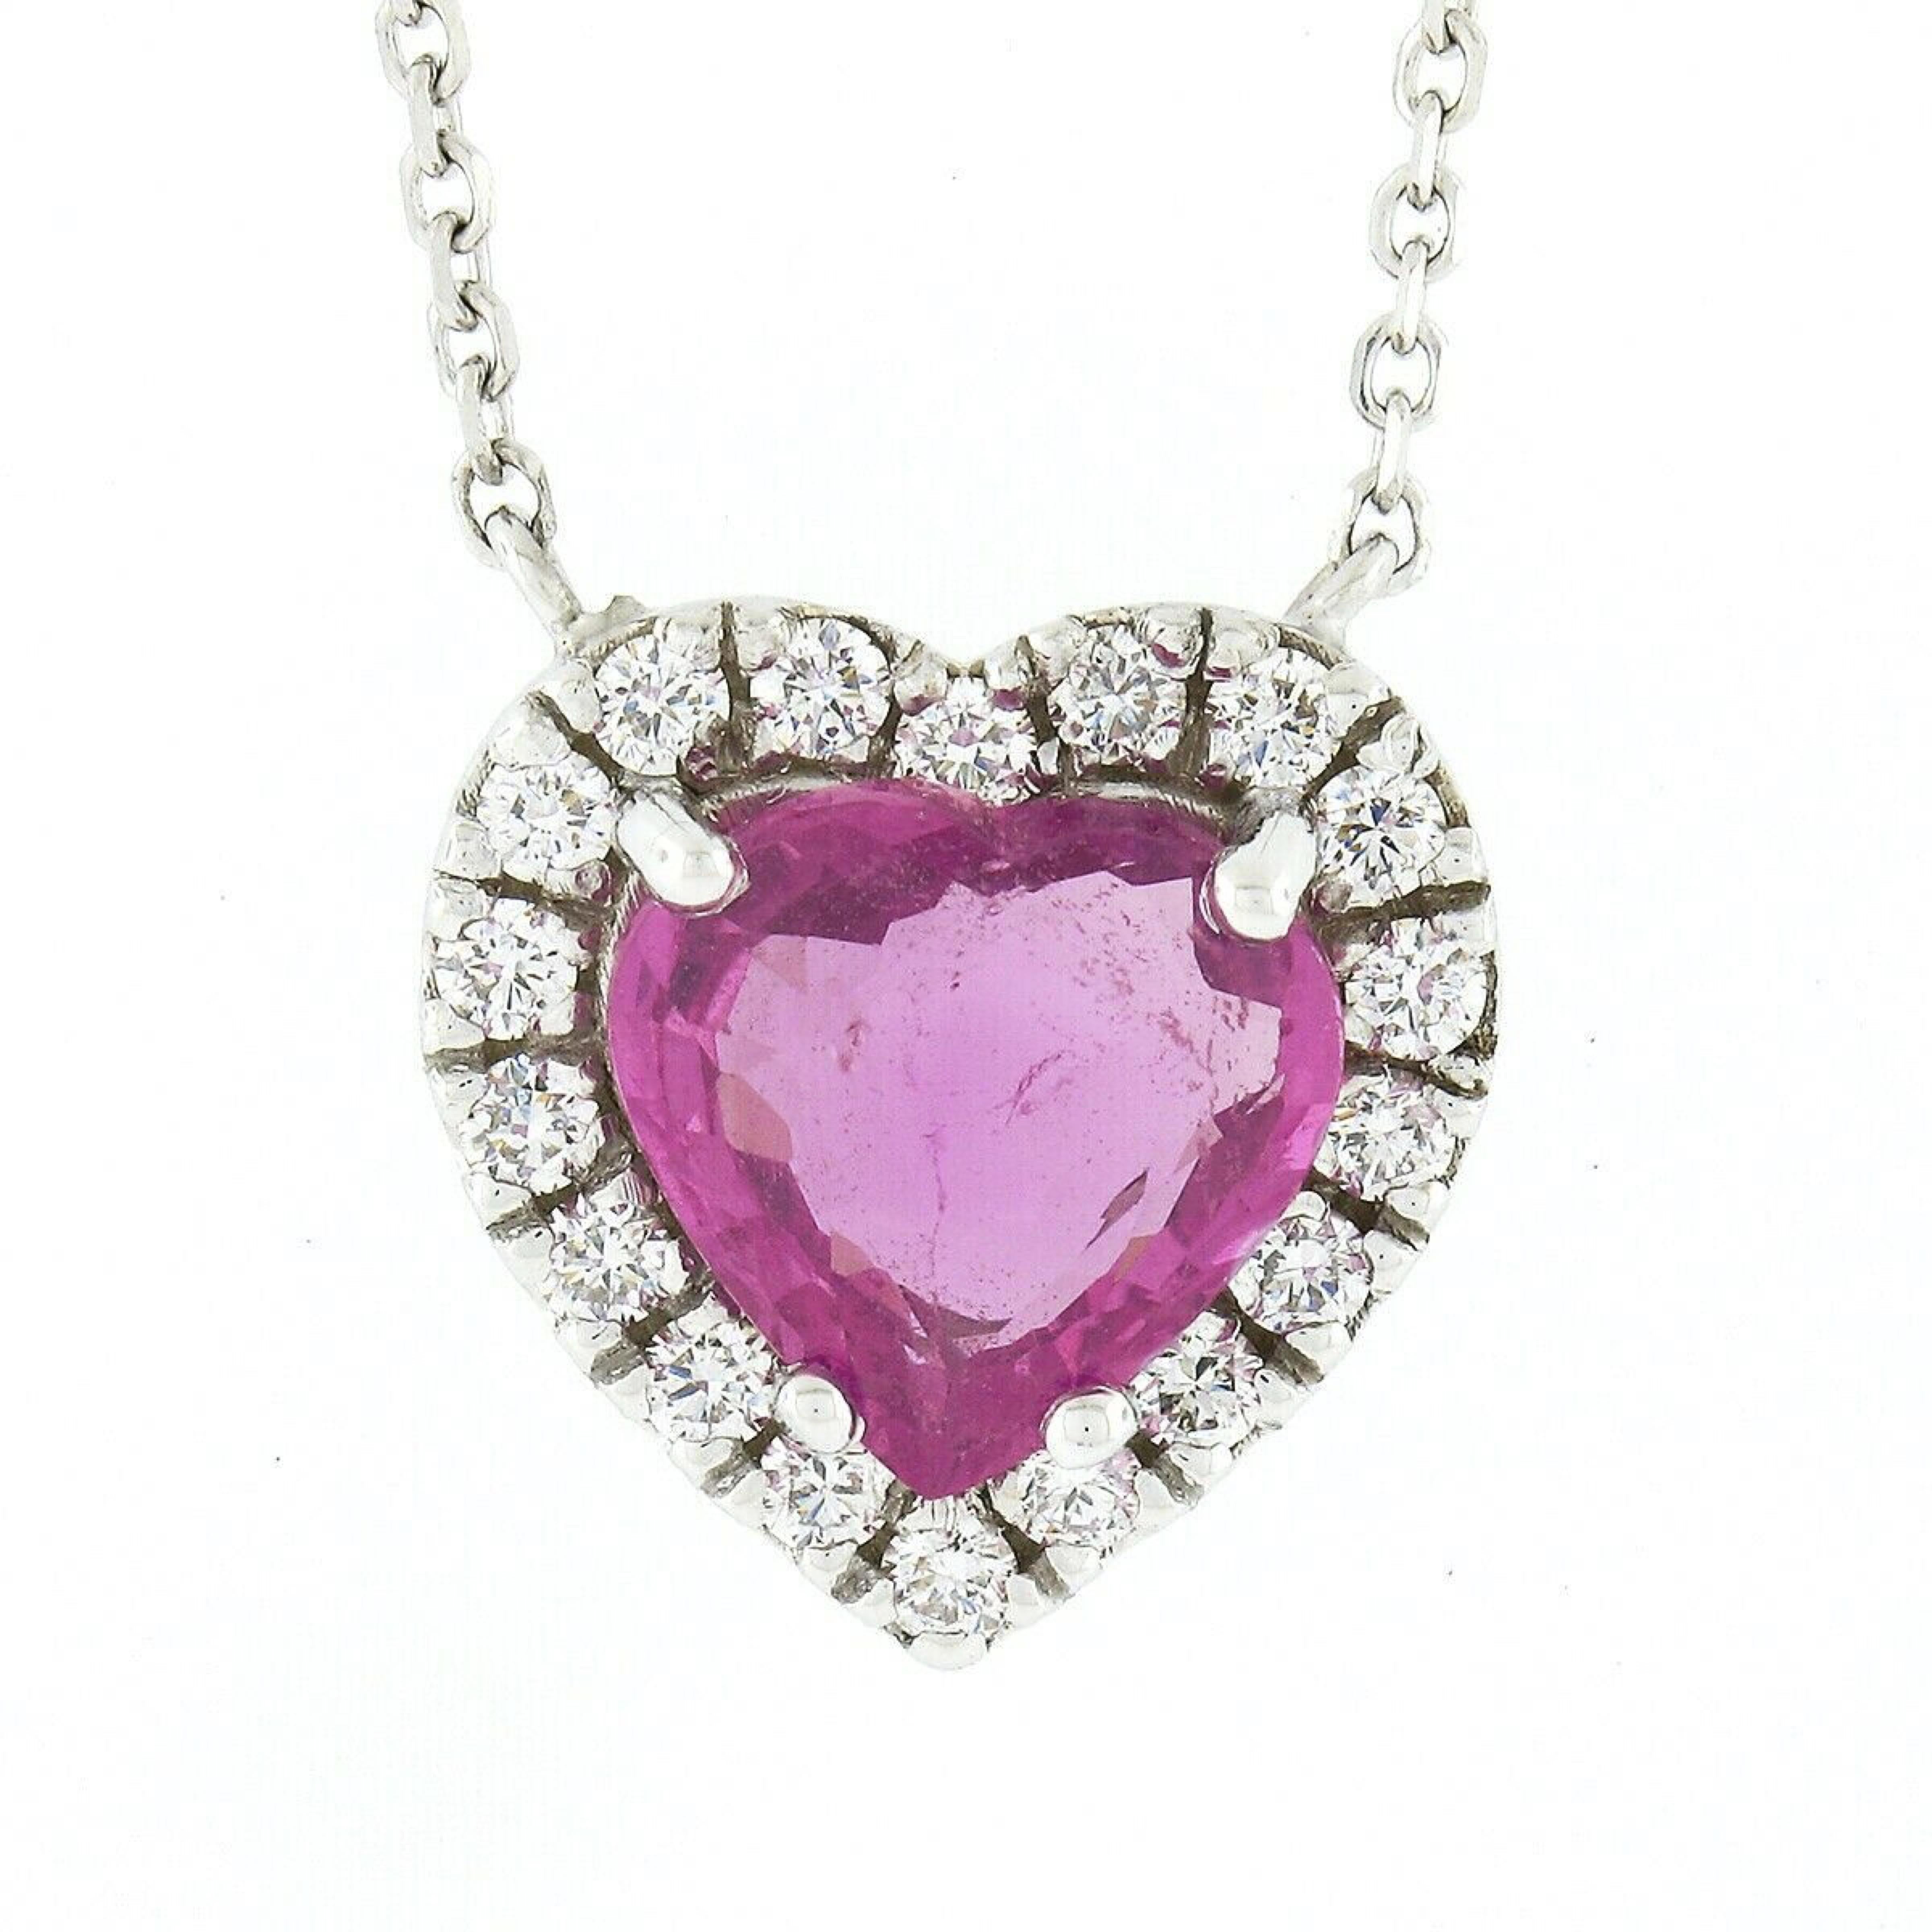 Here we have a gorgeous, brand new and custom made pendant necklace crafted in solid 14k white gold and features a lovely heart design constructed from a very fine, GIA certified, heart brilliant cut pink sapphire solitaire neatly set at the center